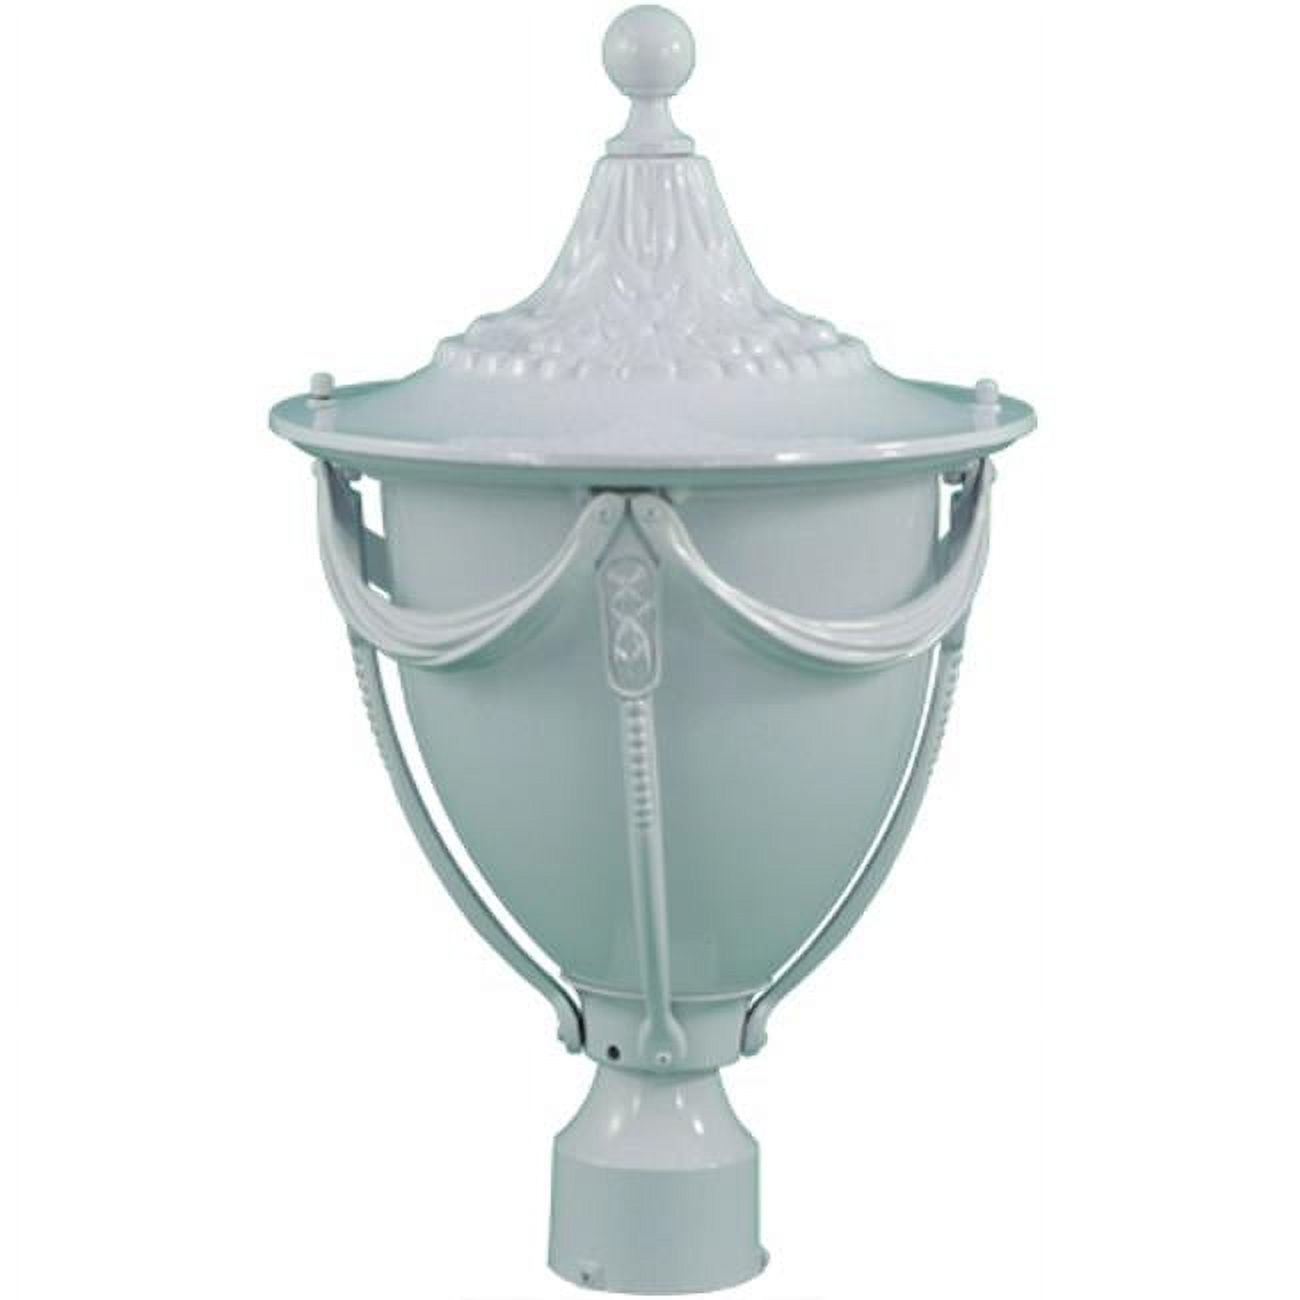 Picture of Dabmar Lighting GM480-W Powder Coated Cast Aluminum Post Top Light Fixture, White - 19 x 11.31 x 11.31 in.